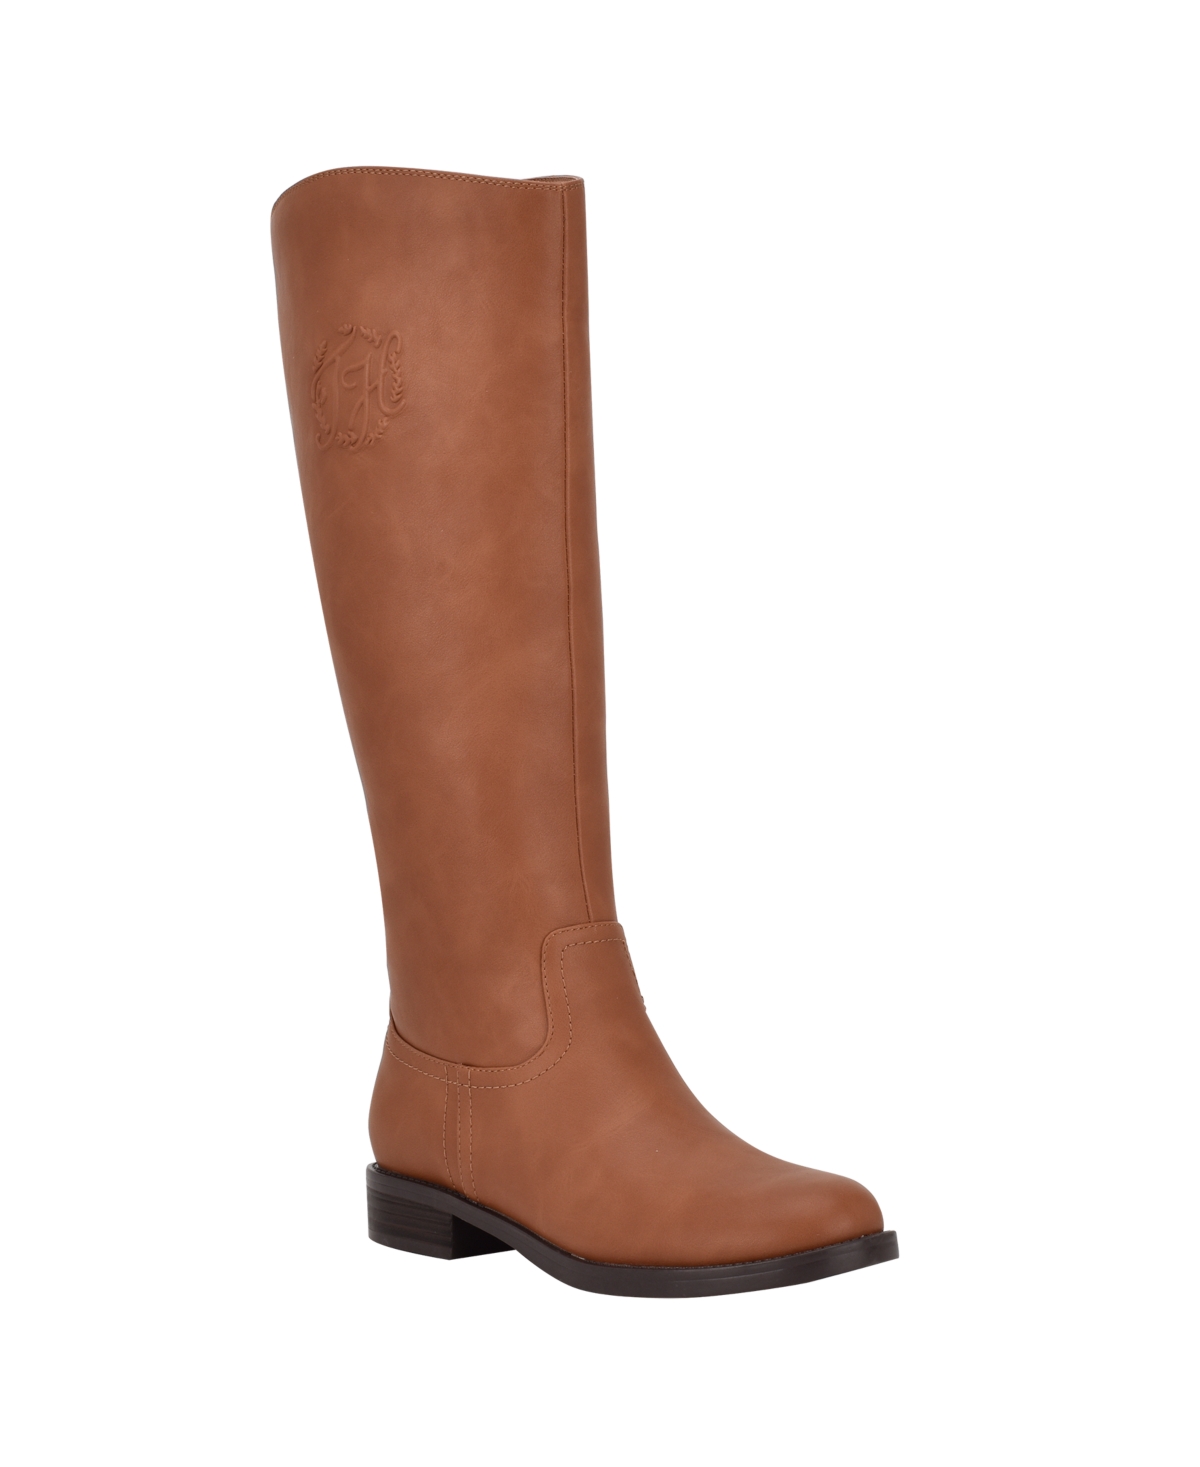 UPC 195972921320 product image for Tommy Hilfiger Women's Rydings Riding Boots Women's Shoes | upcitemdb.com